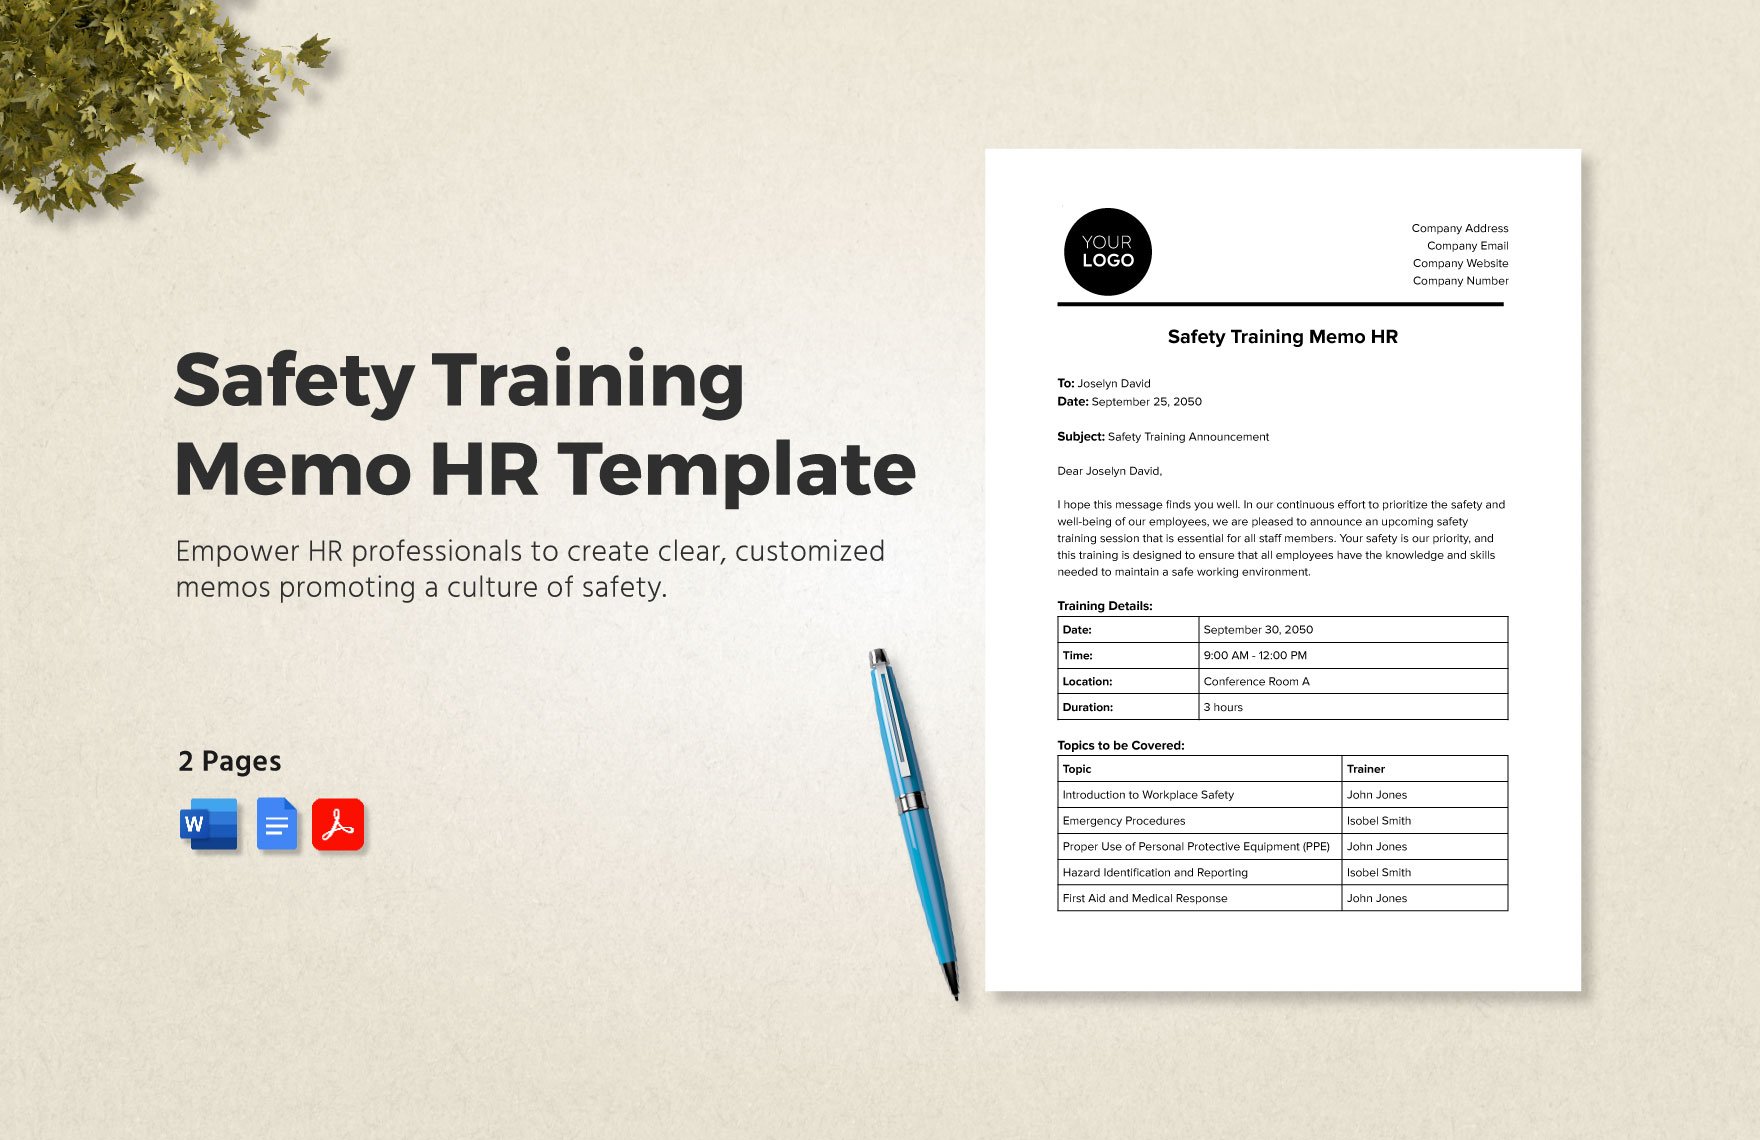 Safety Training Memo HR Template